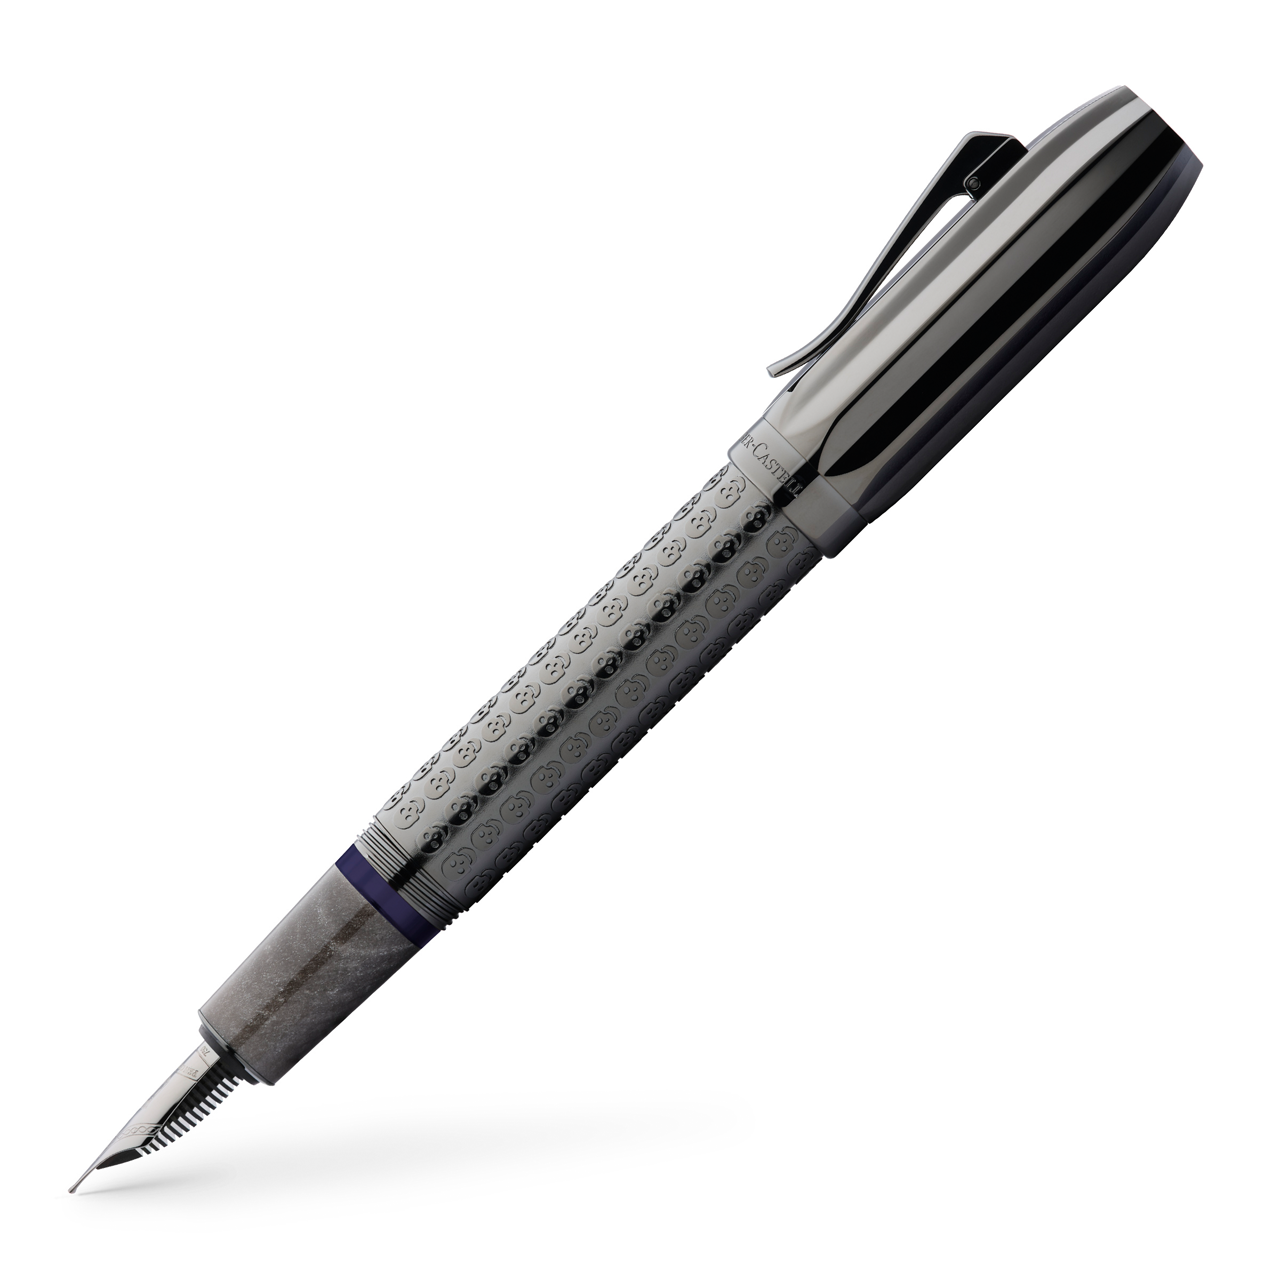 Graf-von-Faber-Castell - Fountain pen Pen of the Year 2022 Limited Edition, M